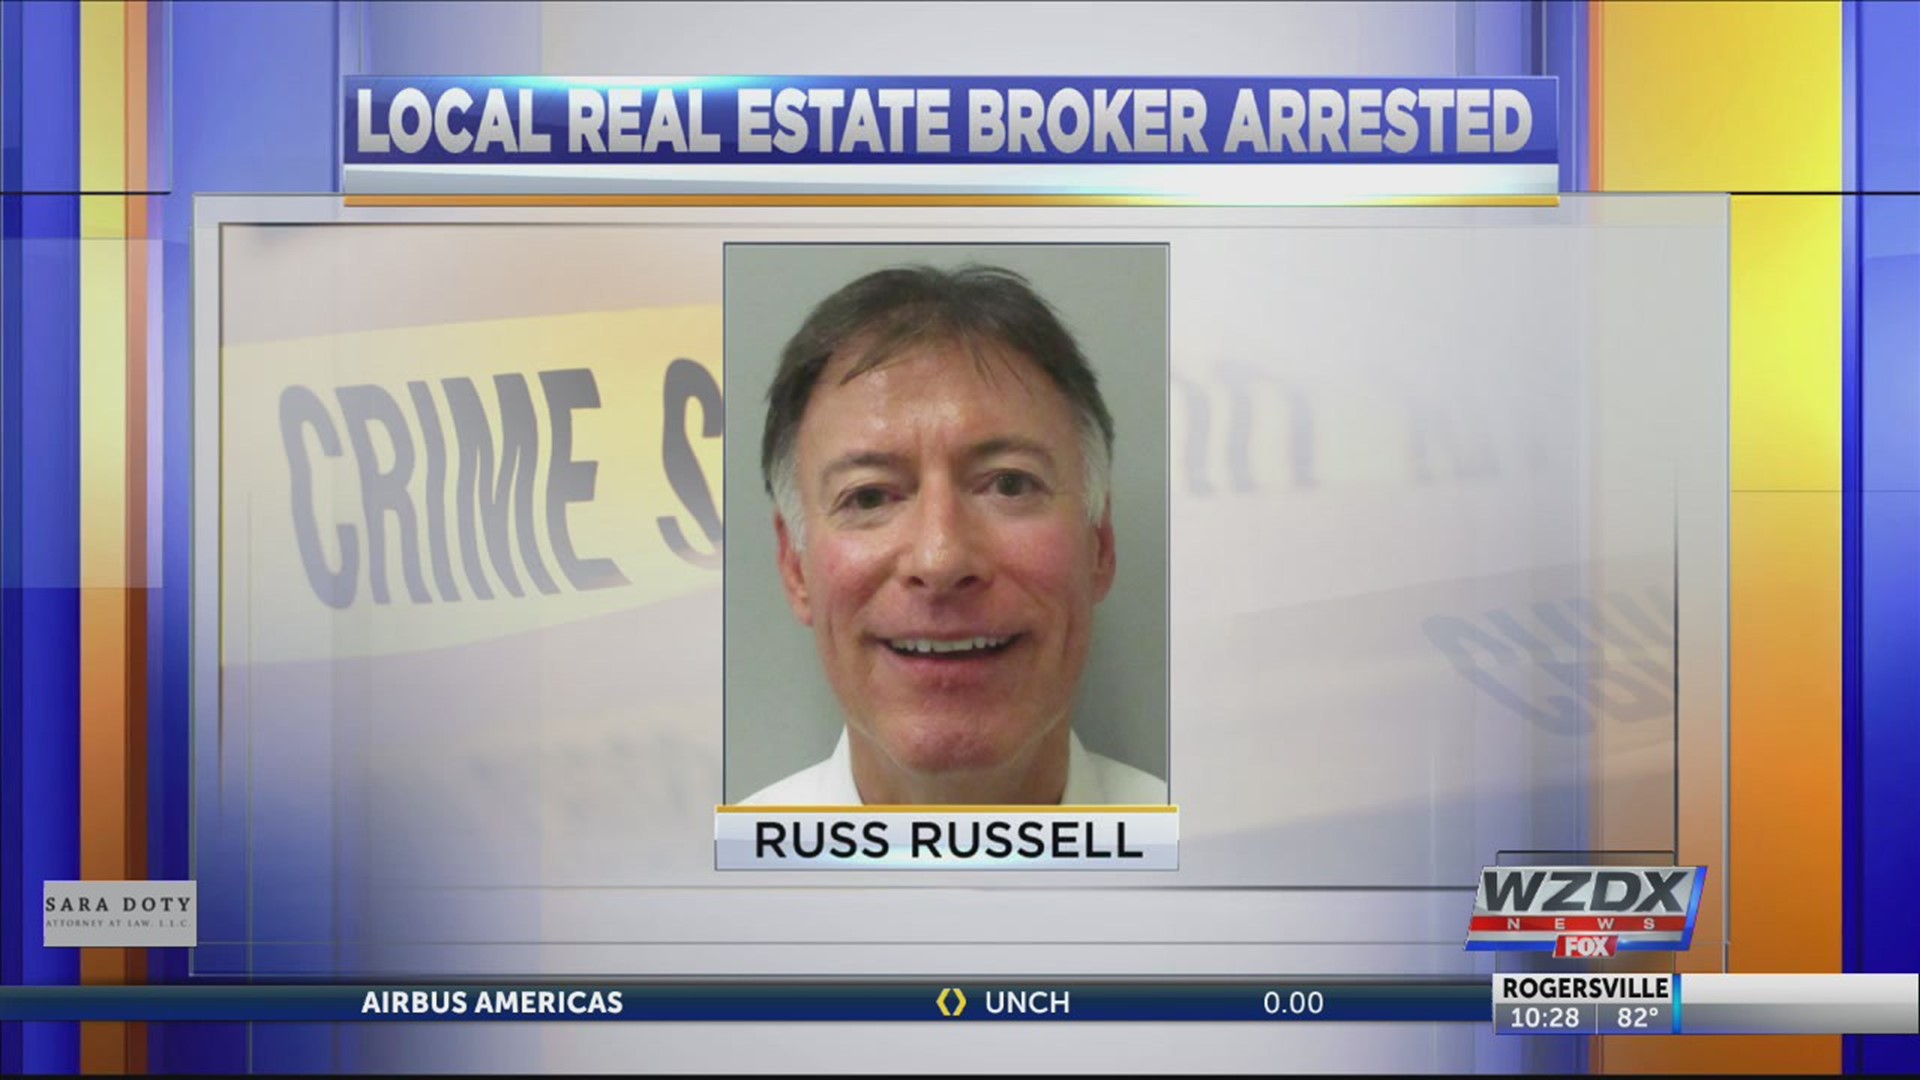 Prominent realtor Russ Russell was arrested and charged with harassment.